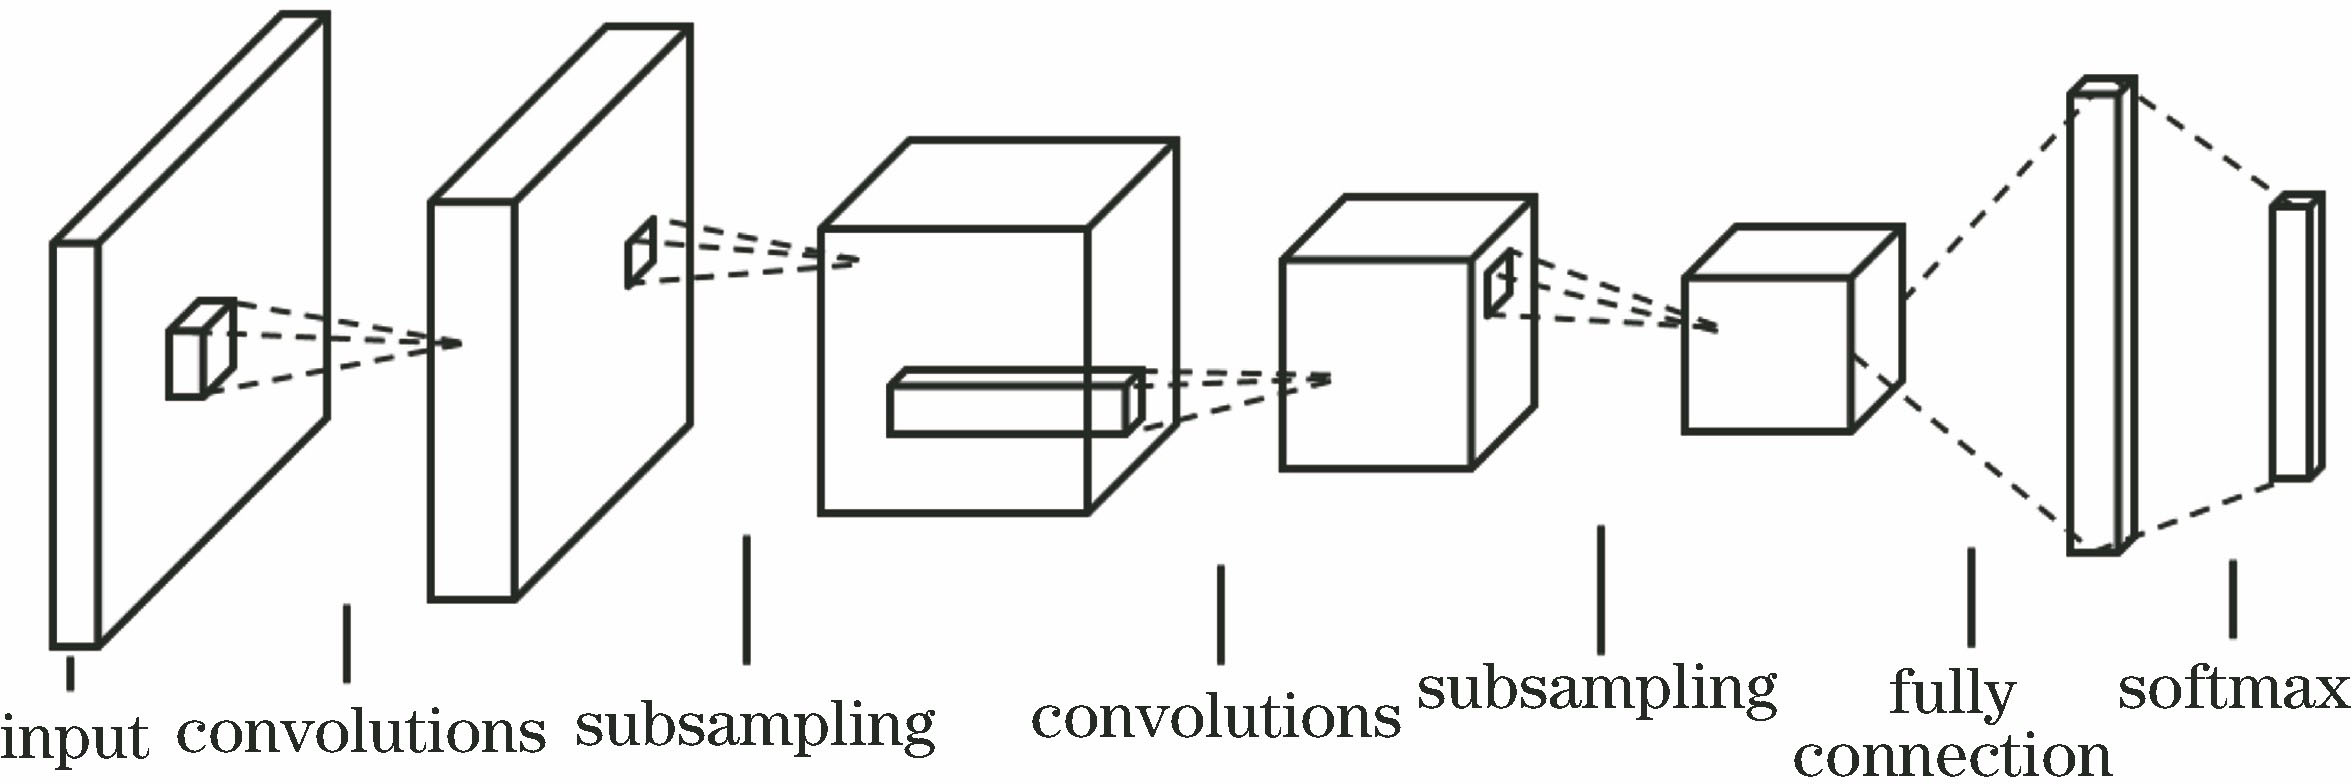 Model structure of convolutional neural network